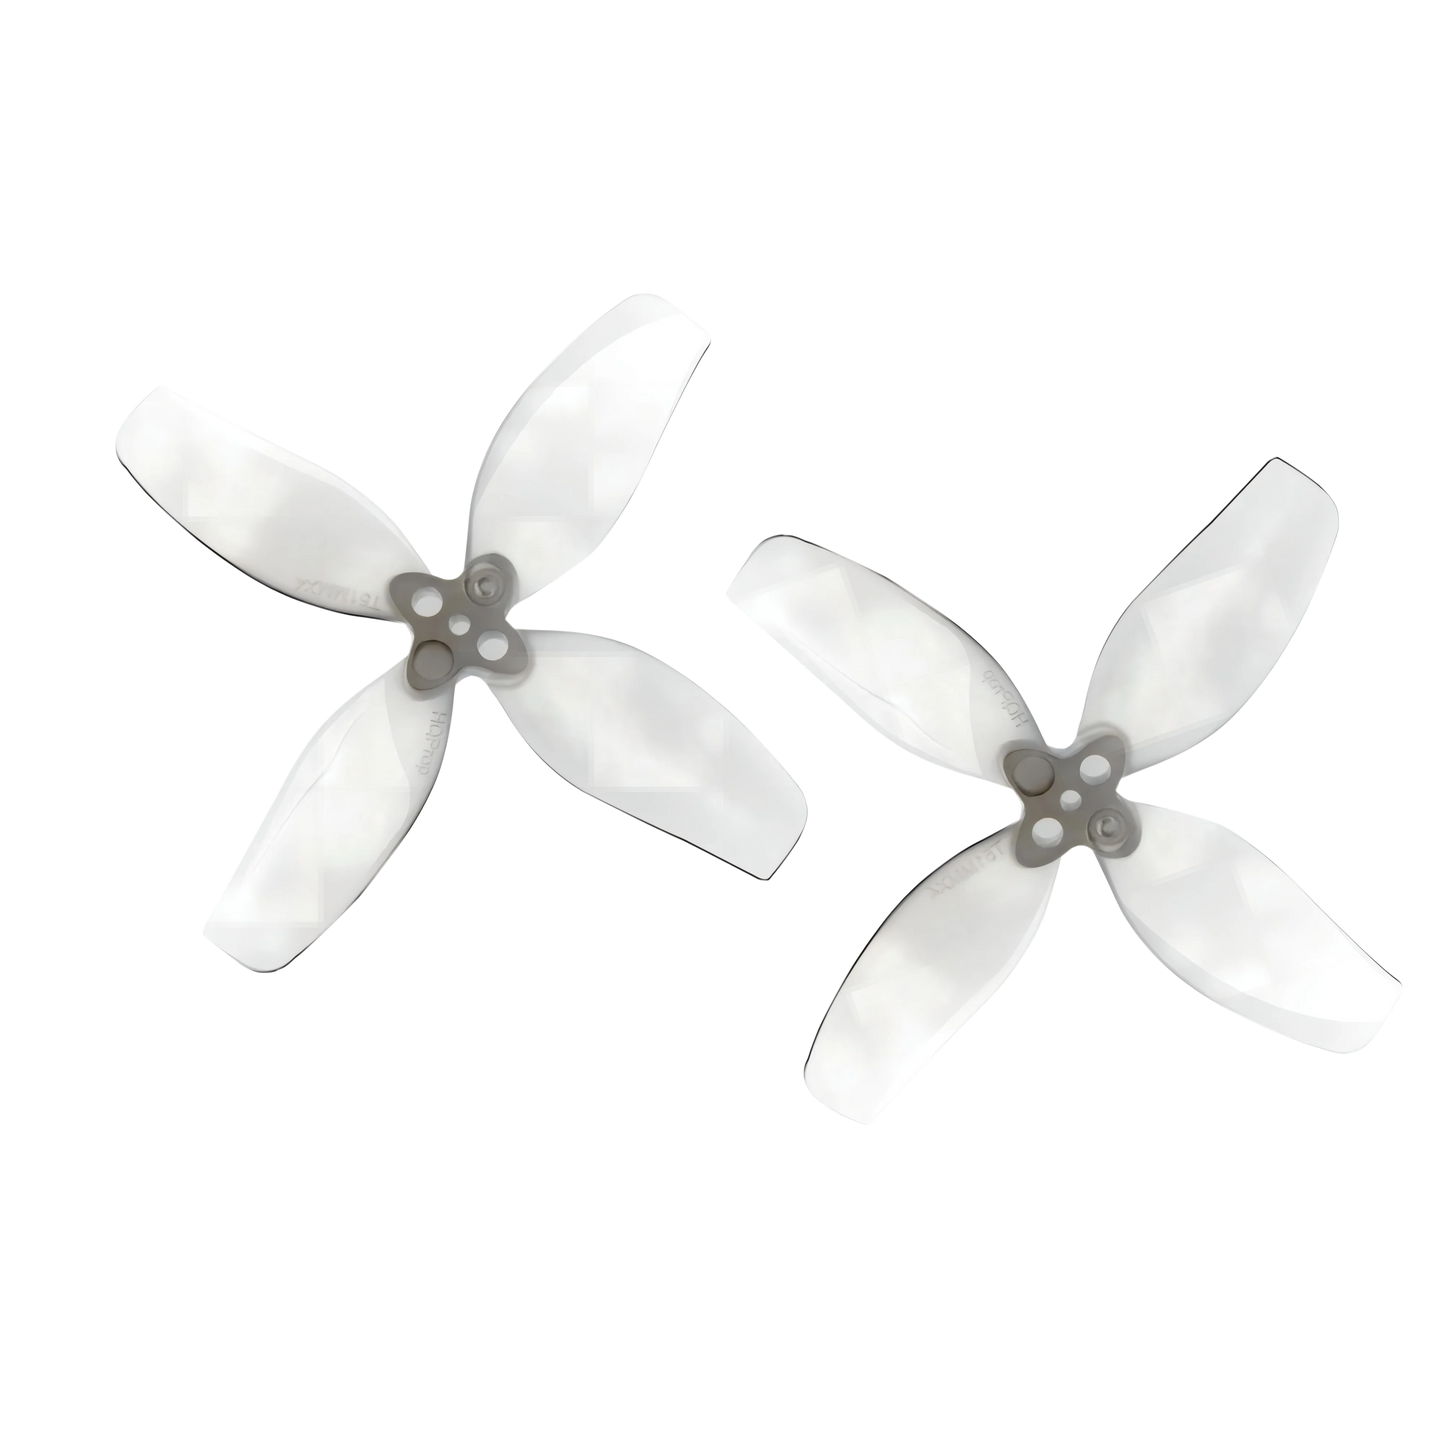 16pcs/8pairs HQProp DT51MMX4GR 4-Blade propeller 2inch prop for FPV drone parts